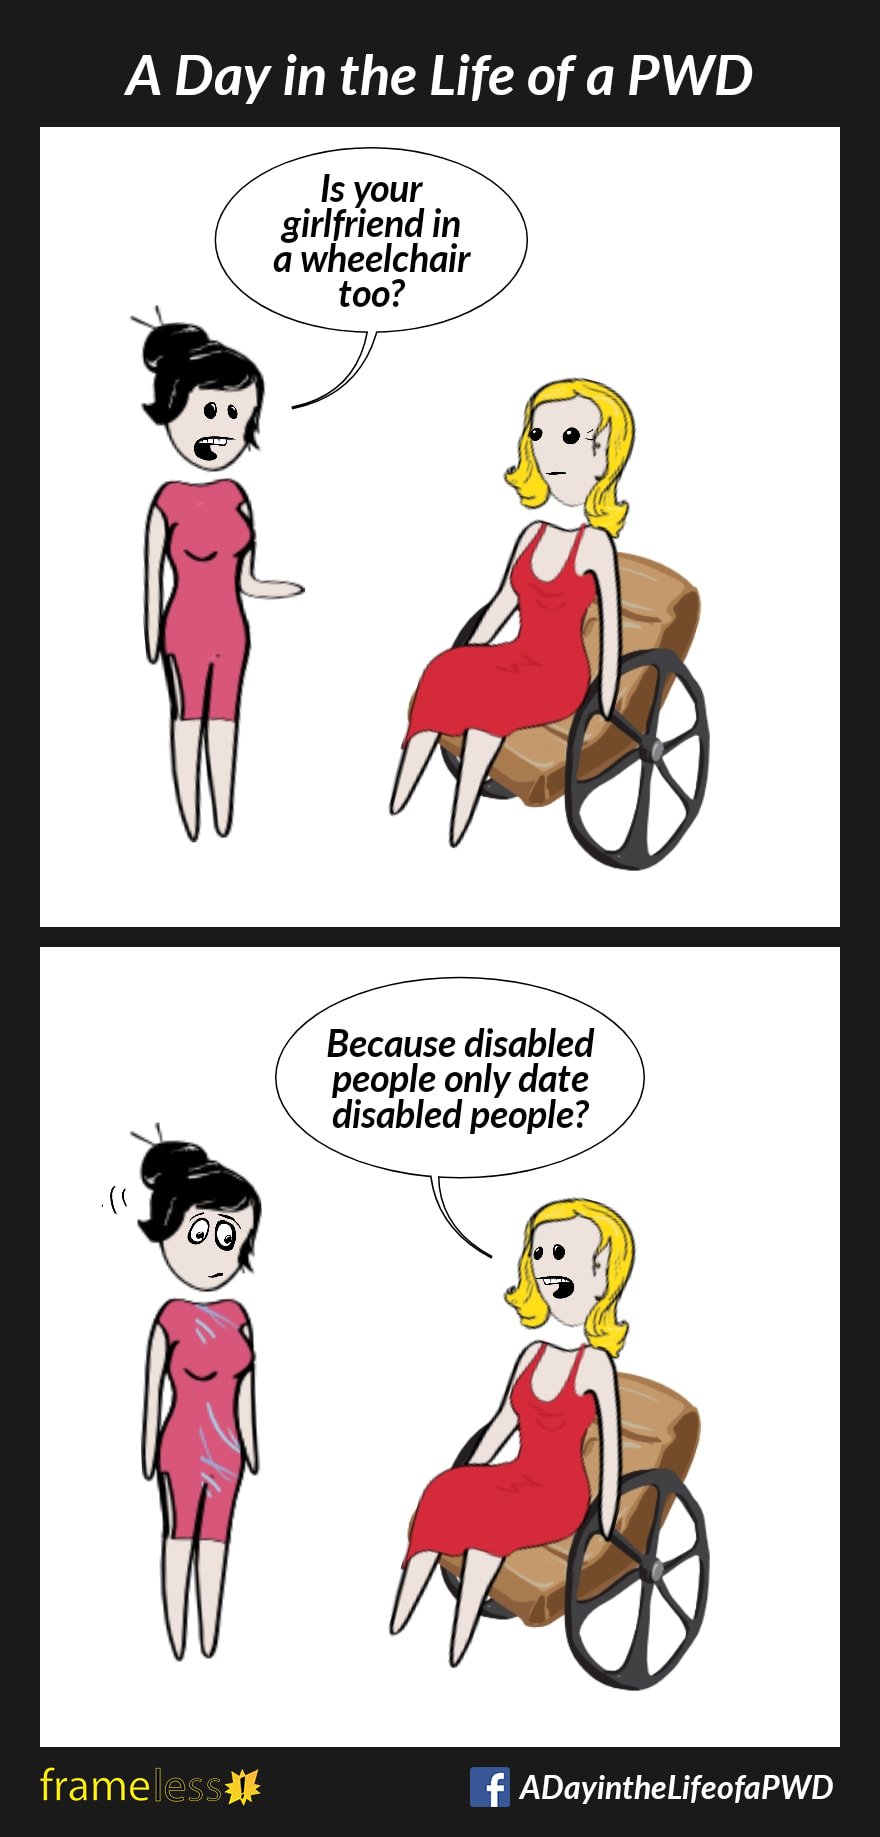 COMIC STRIP 
A Day in the Life of a PWD (Person With a Disability) 

Frame 1:
A woman in a wheelchair is talking with an acquaintance. 
ACQUAINTANCE: Is your girlfriend in a wheelchair too?

Frame 2:
WOMAN: Because disabled people only date disabled people?